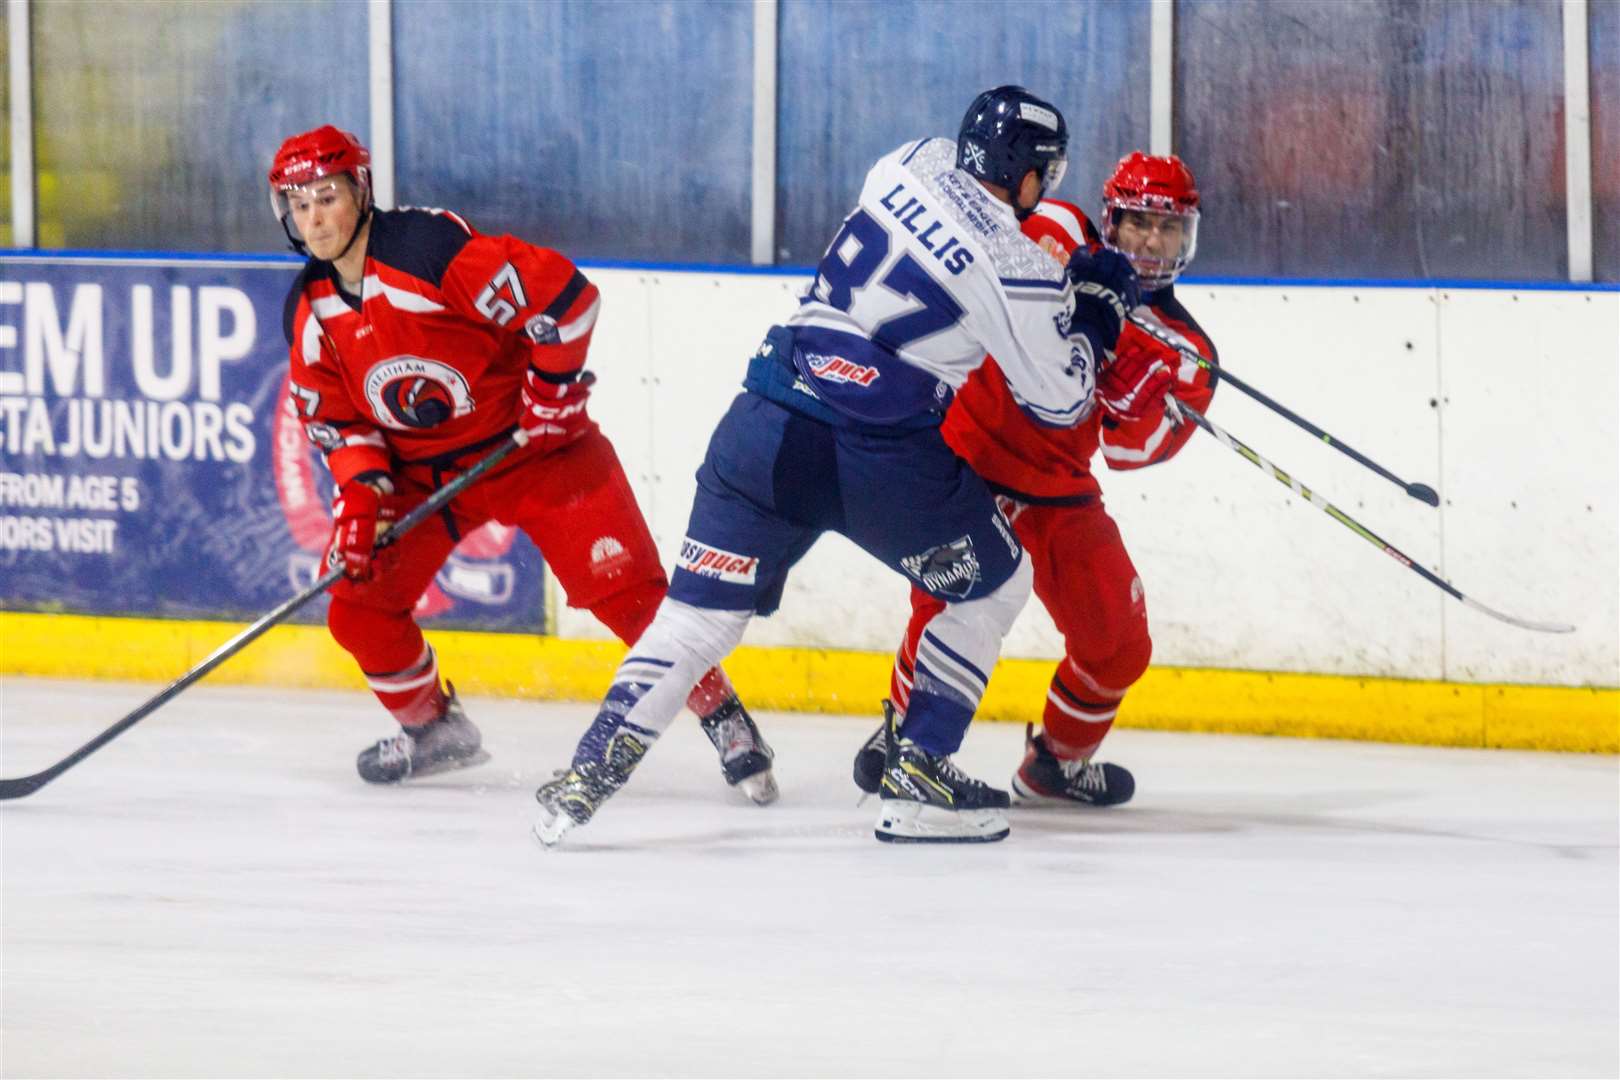 Invicta Dynamos host Junior Raiders in Gillingham this Sunday after ...